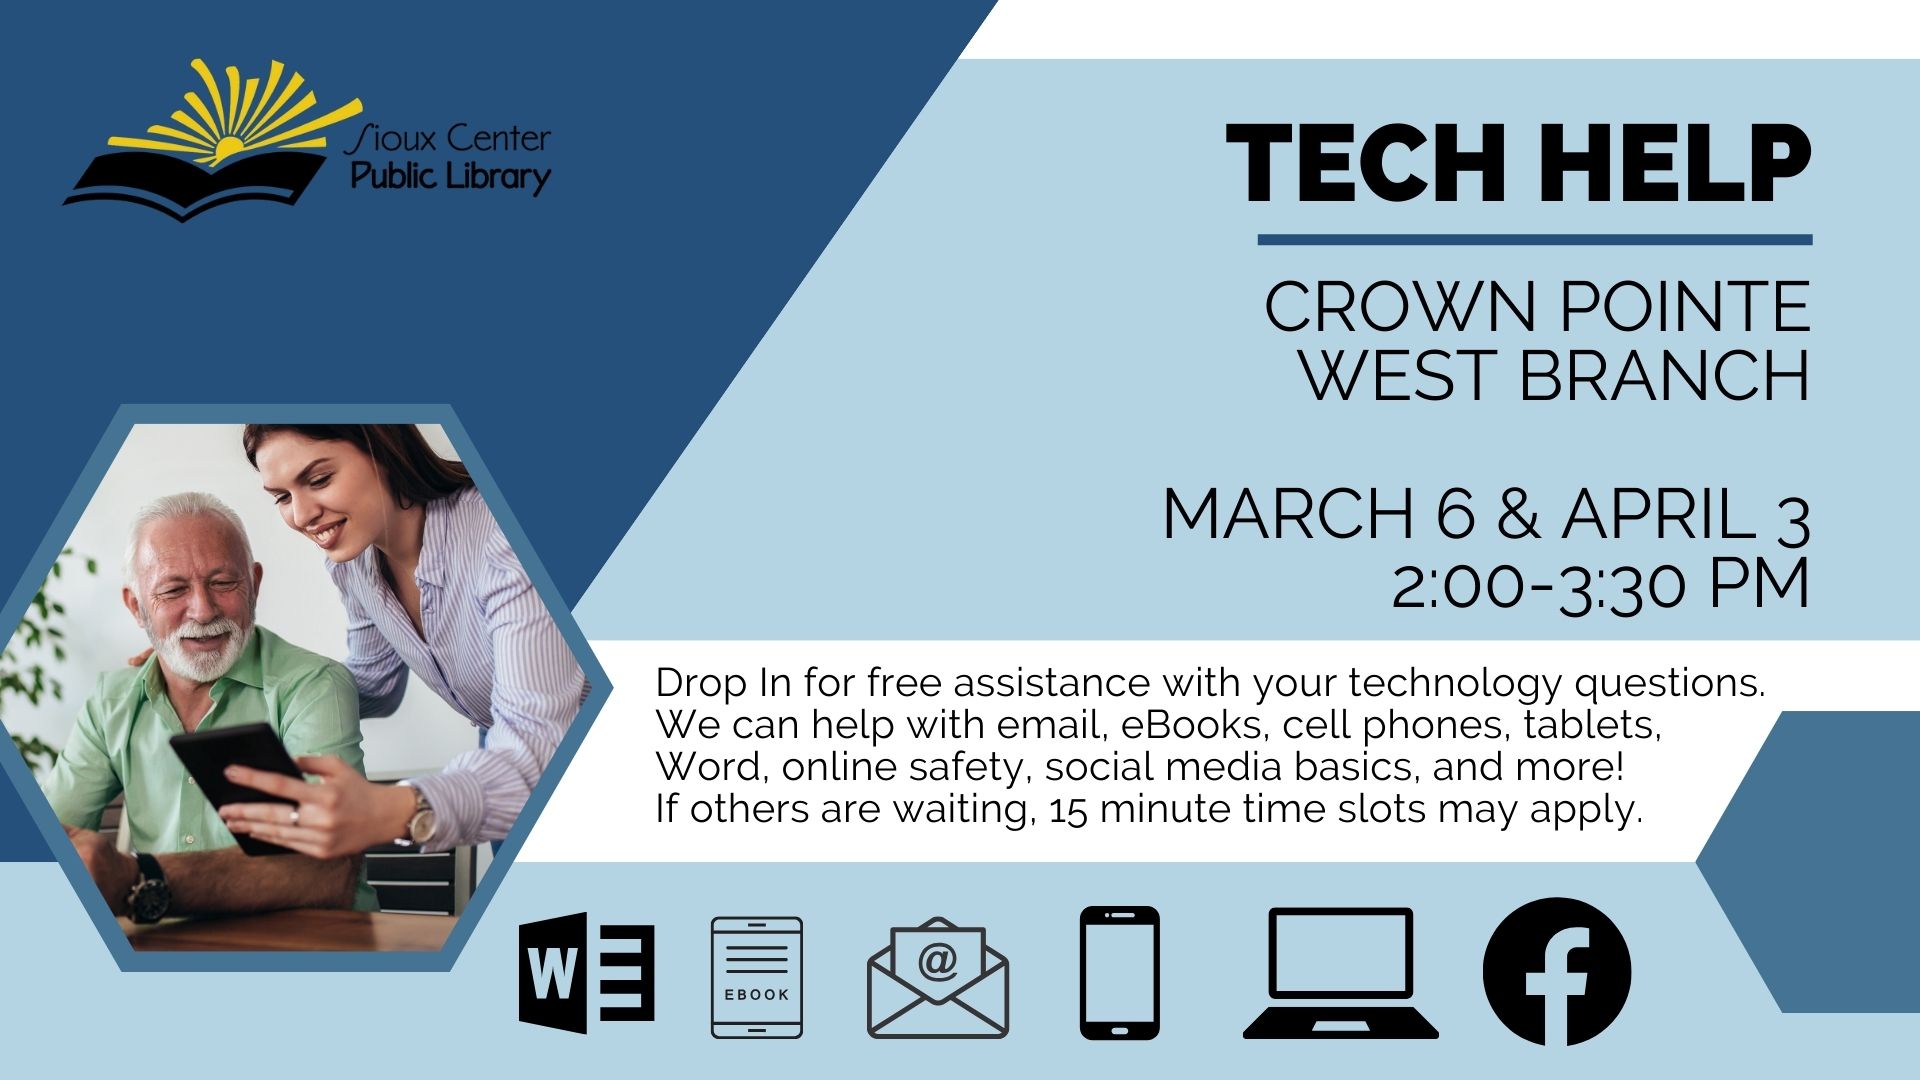 tech help available at Crown Pointe West Branch first wednesdays in March and April